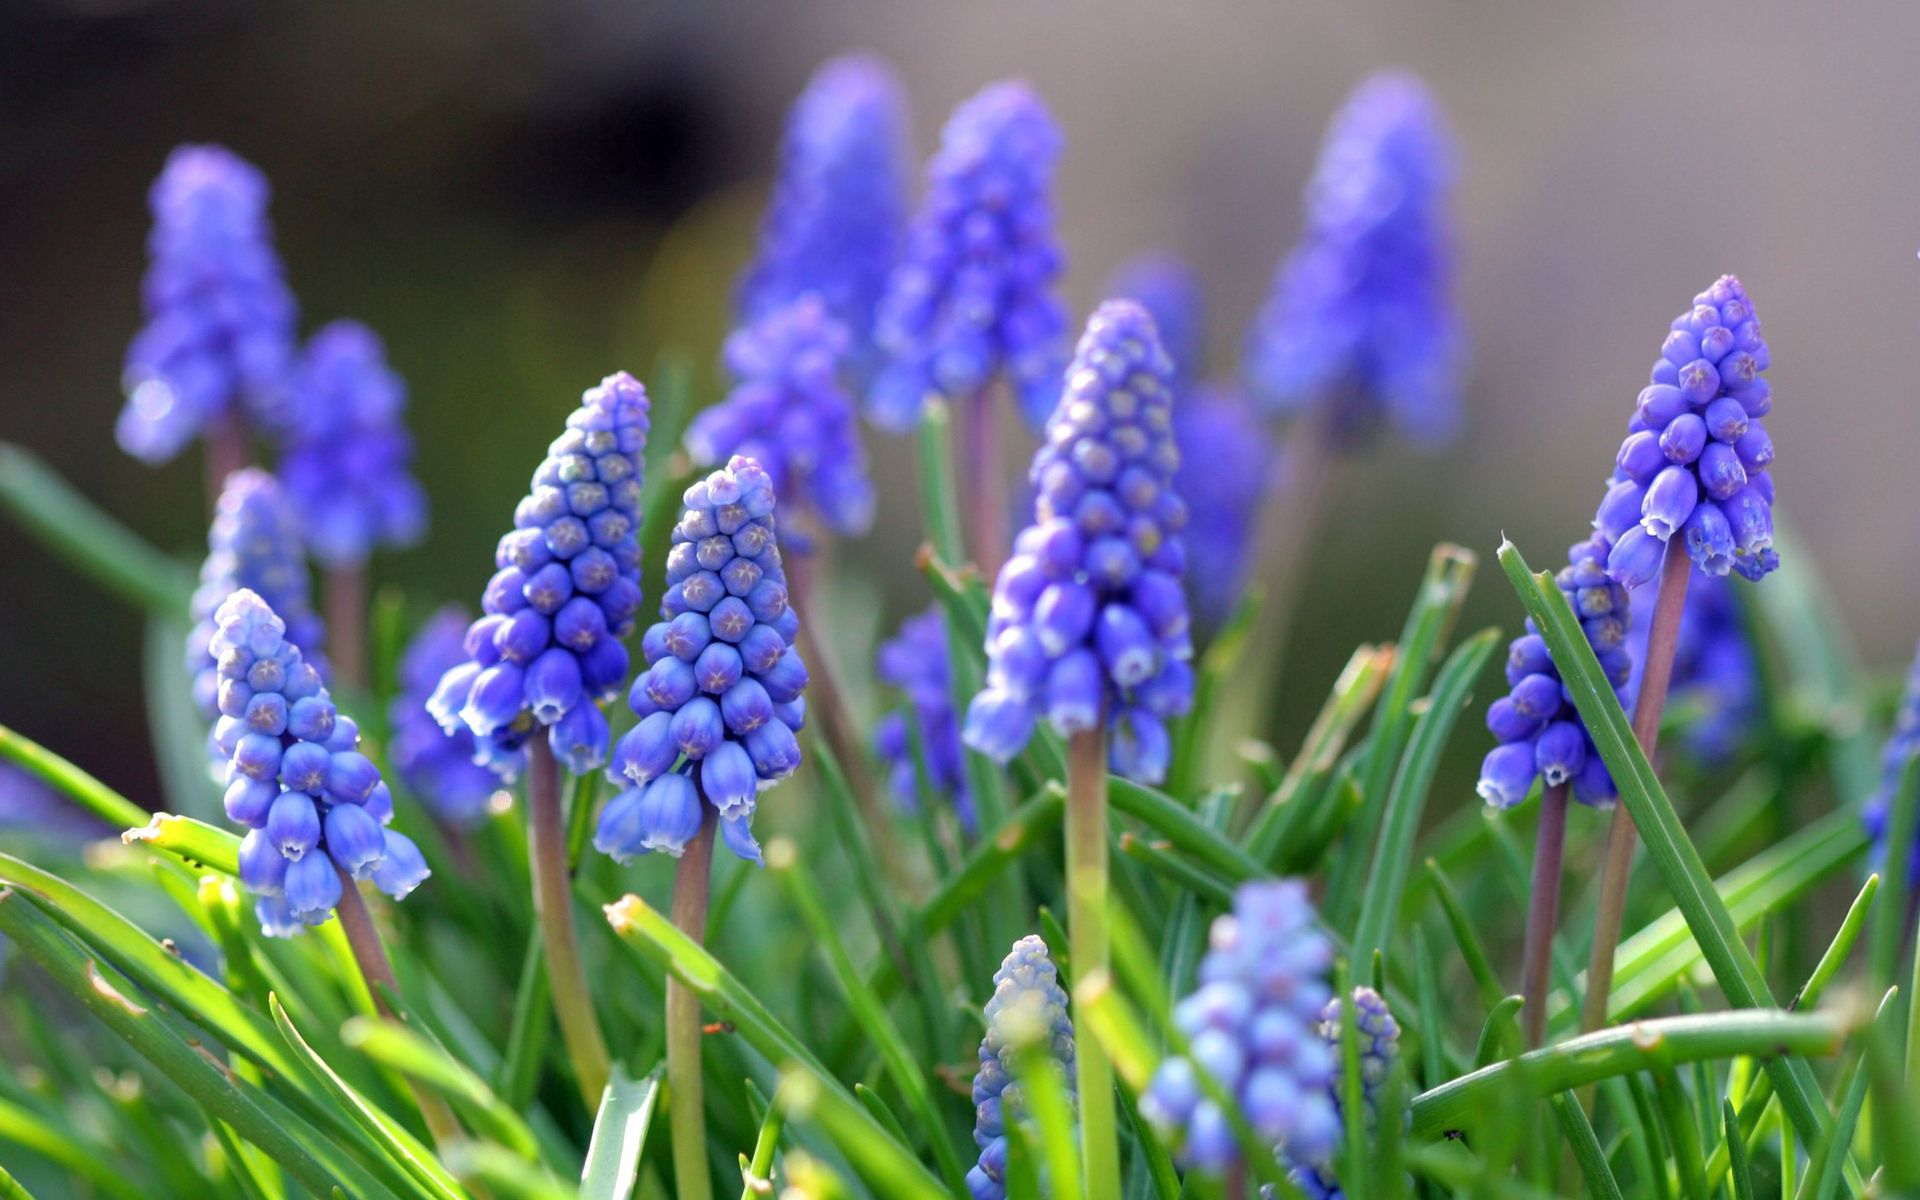 Popular Muscari images for mobile phone